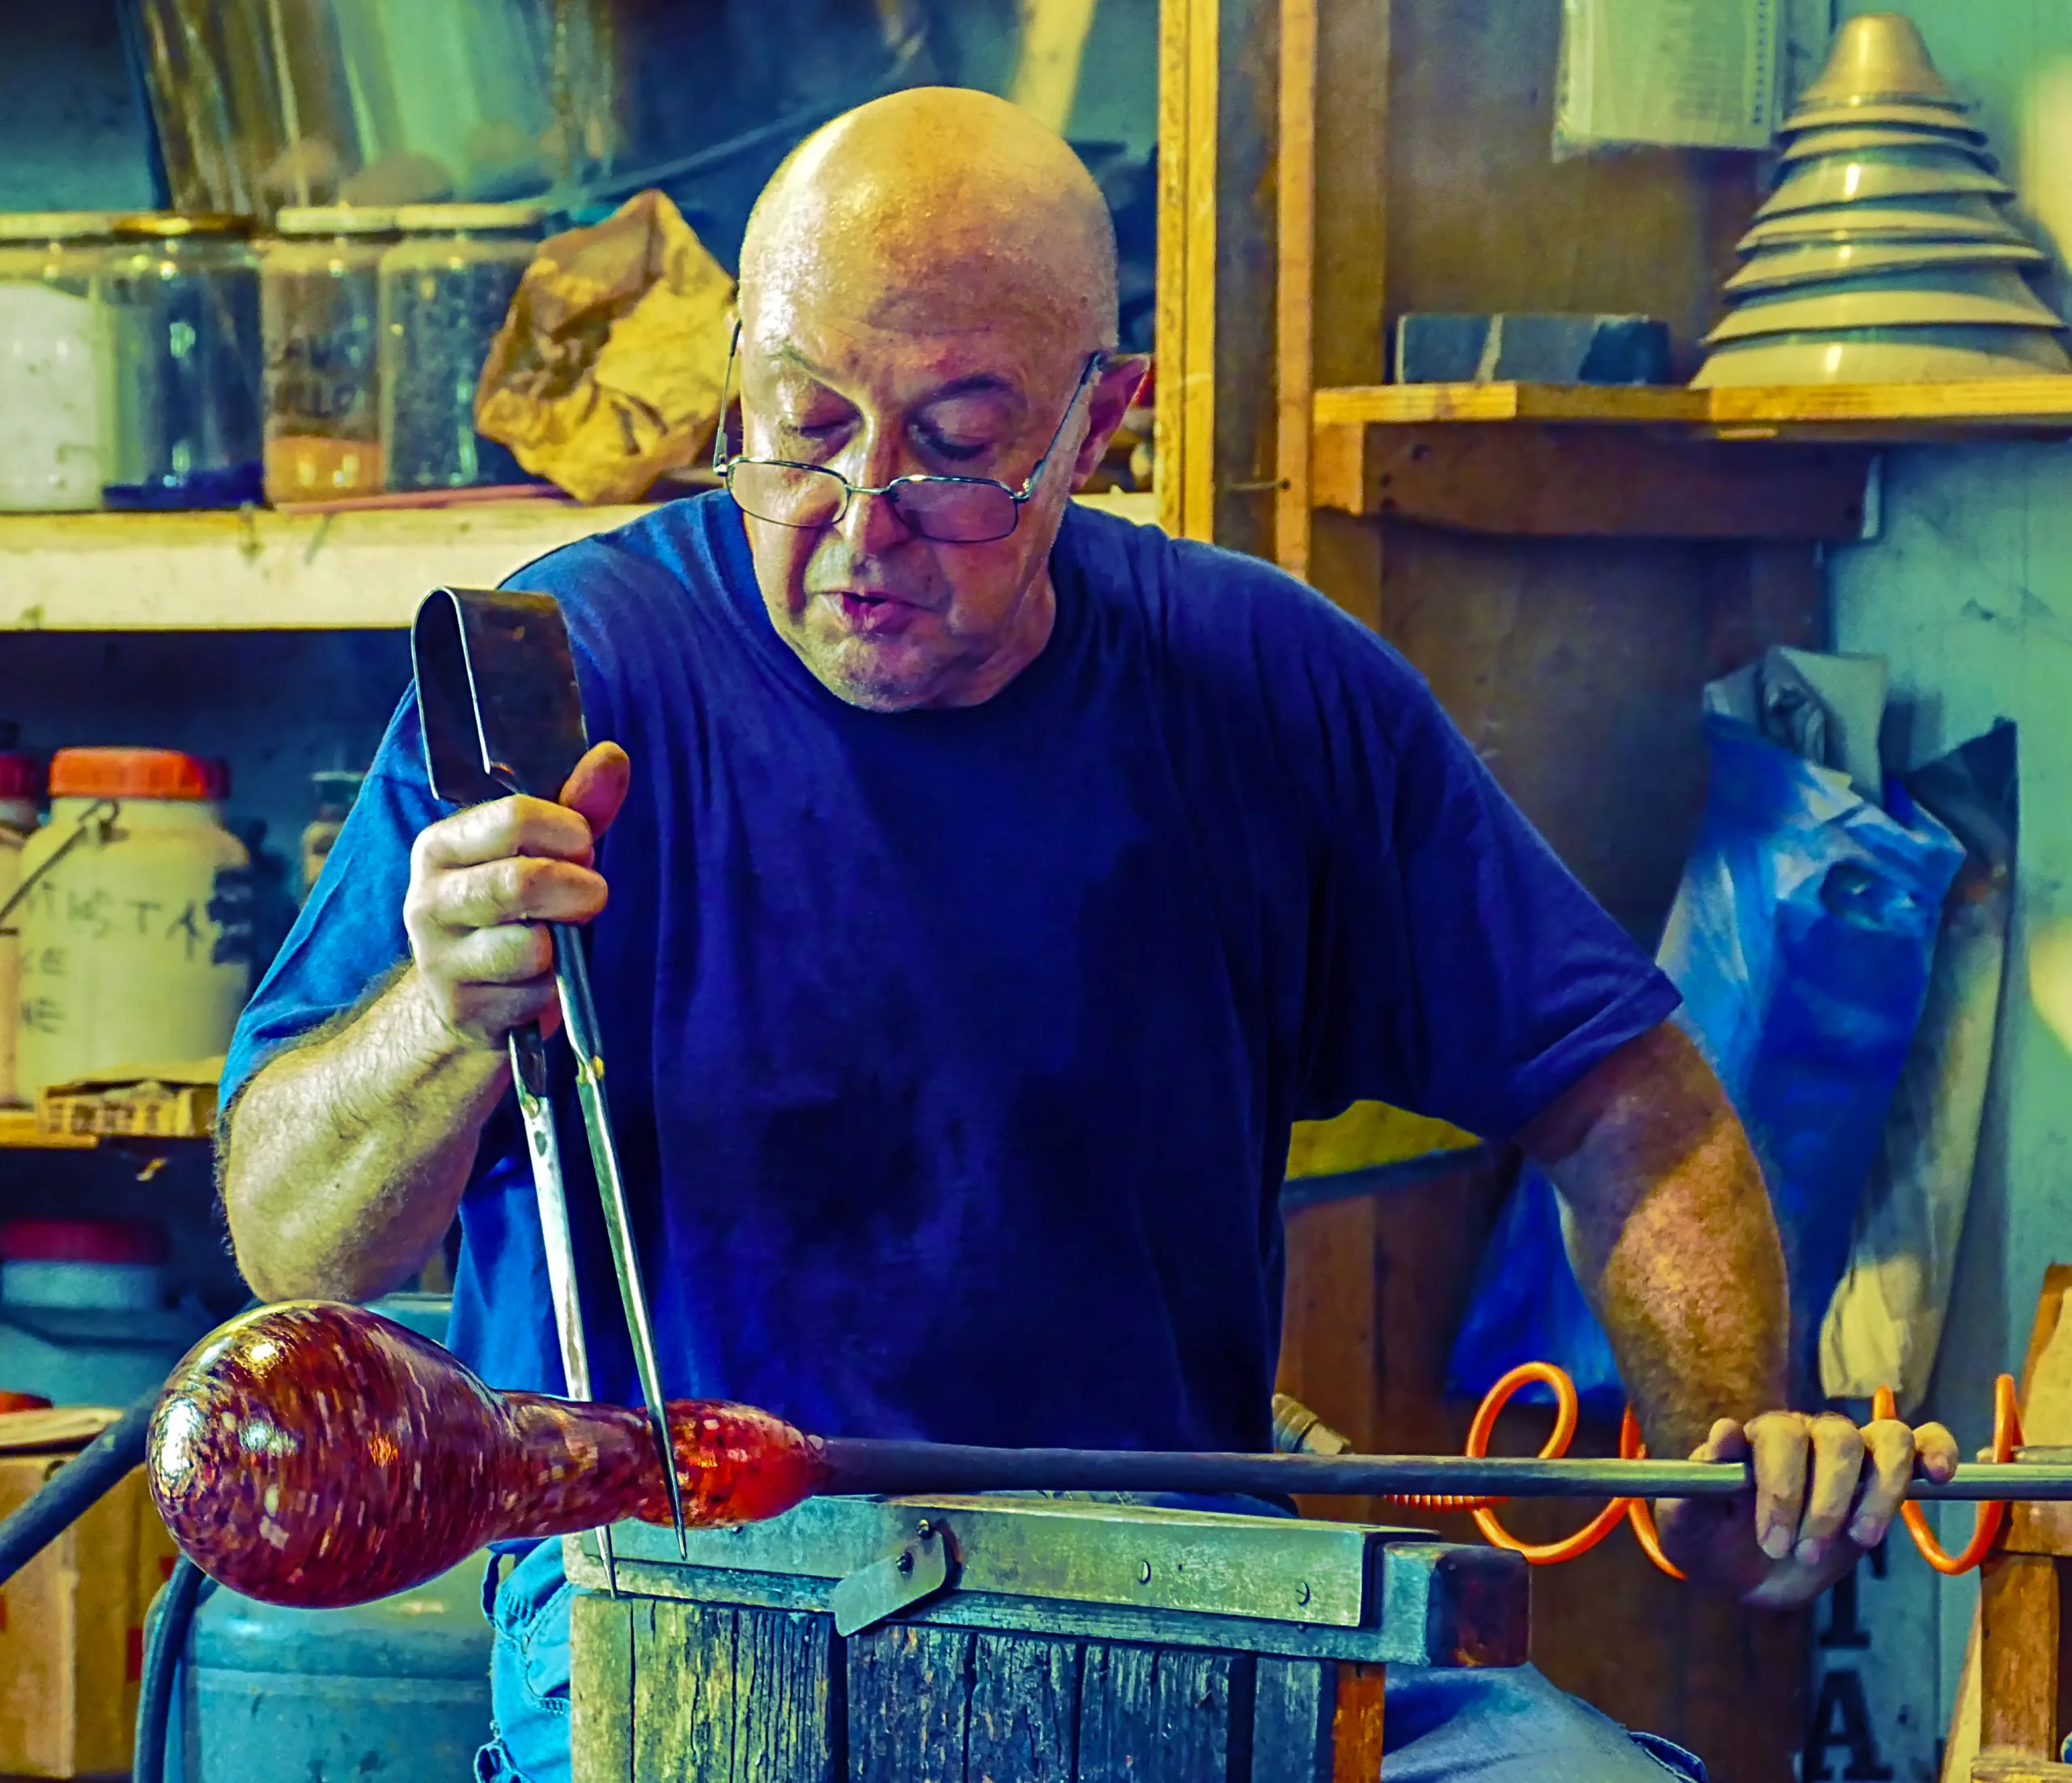 Blown glass being made in Murano